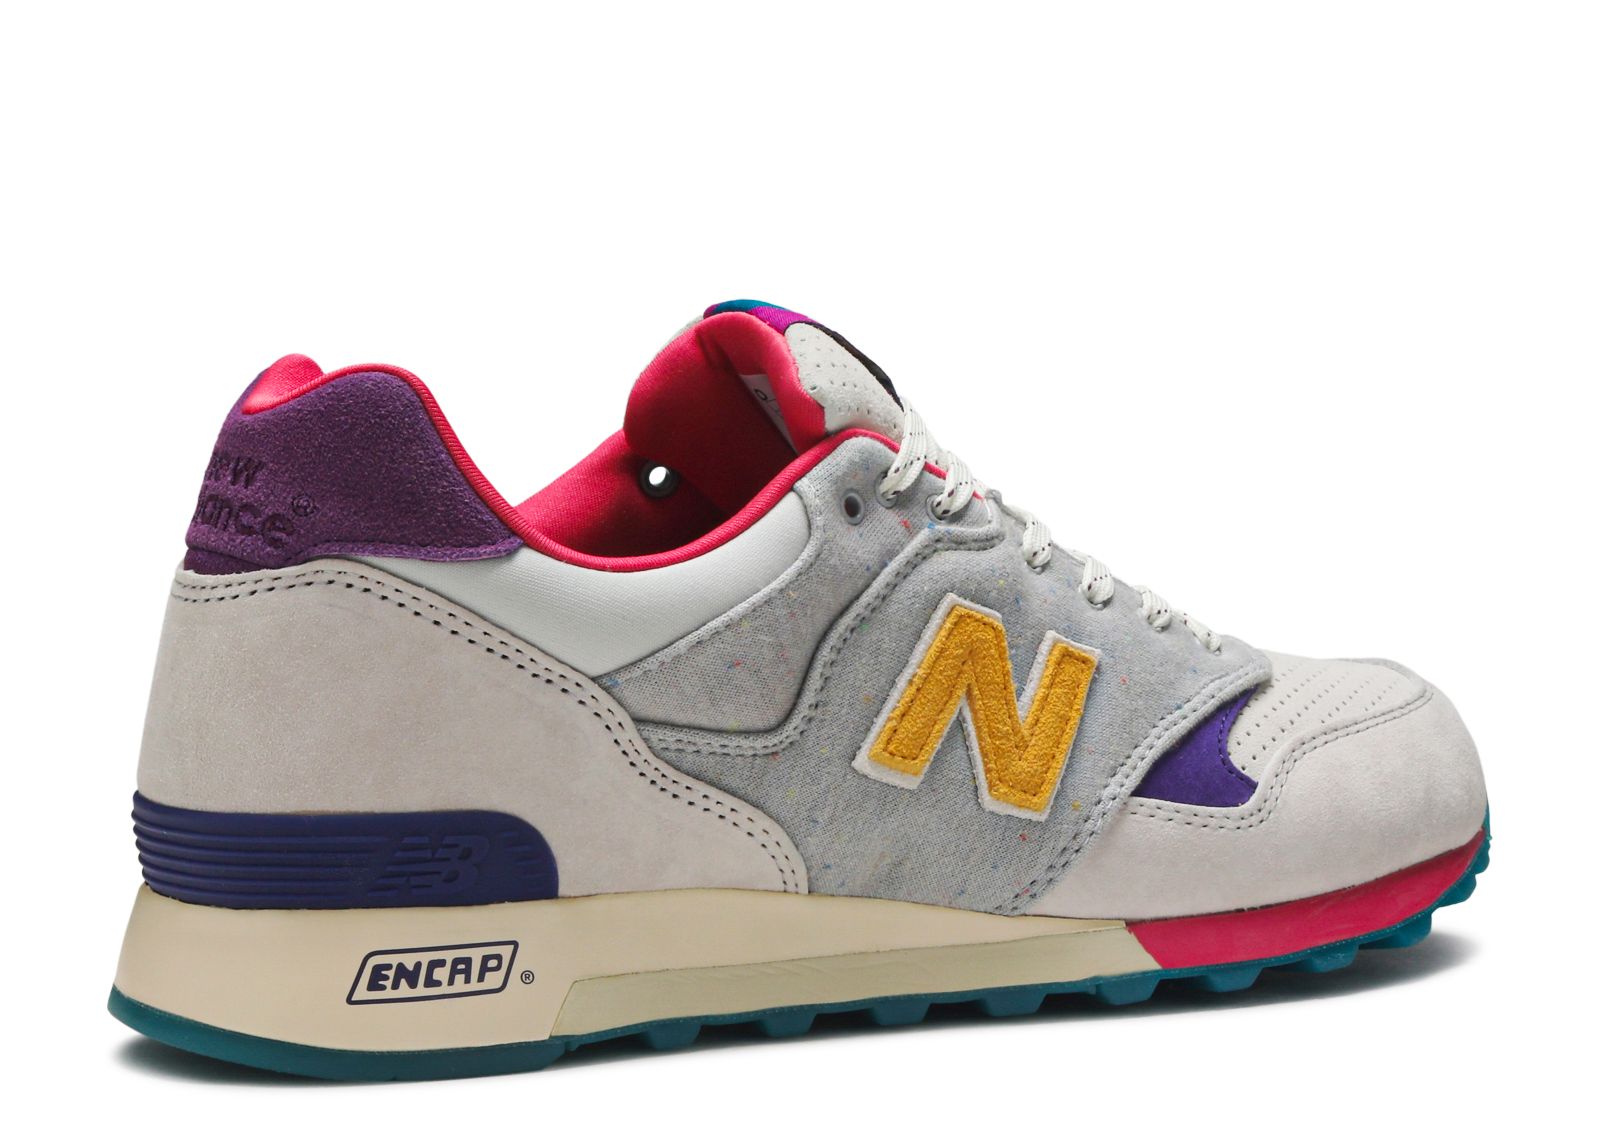 Bodega Meets New Balance: A Match Made in Athletic Heaven